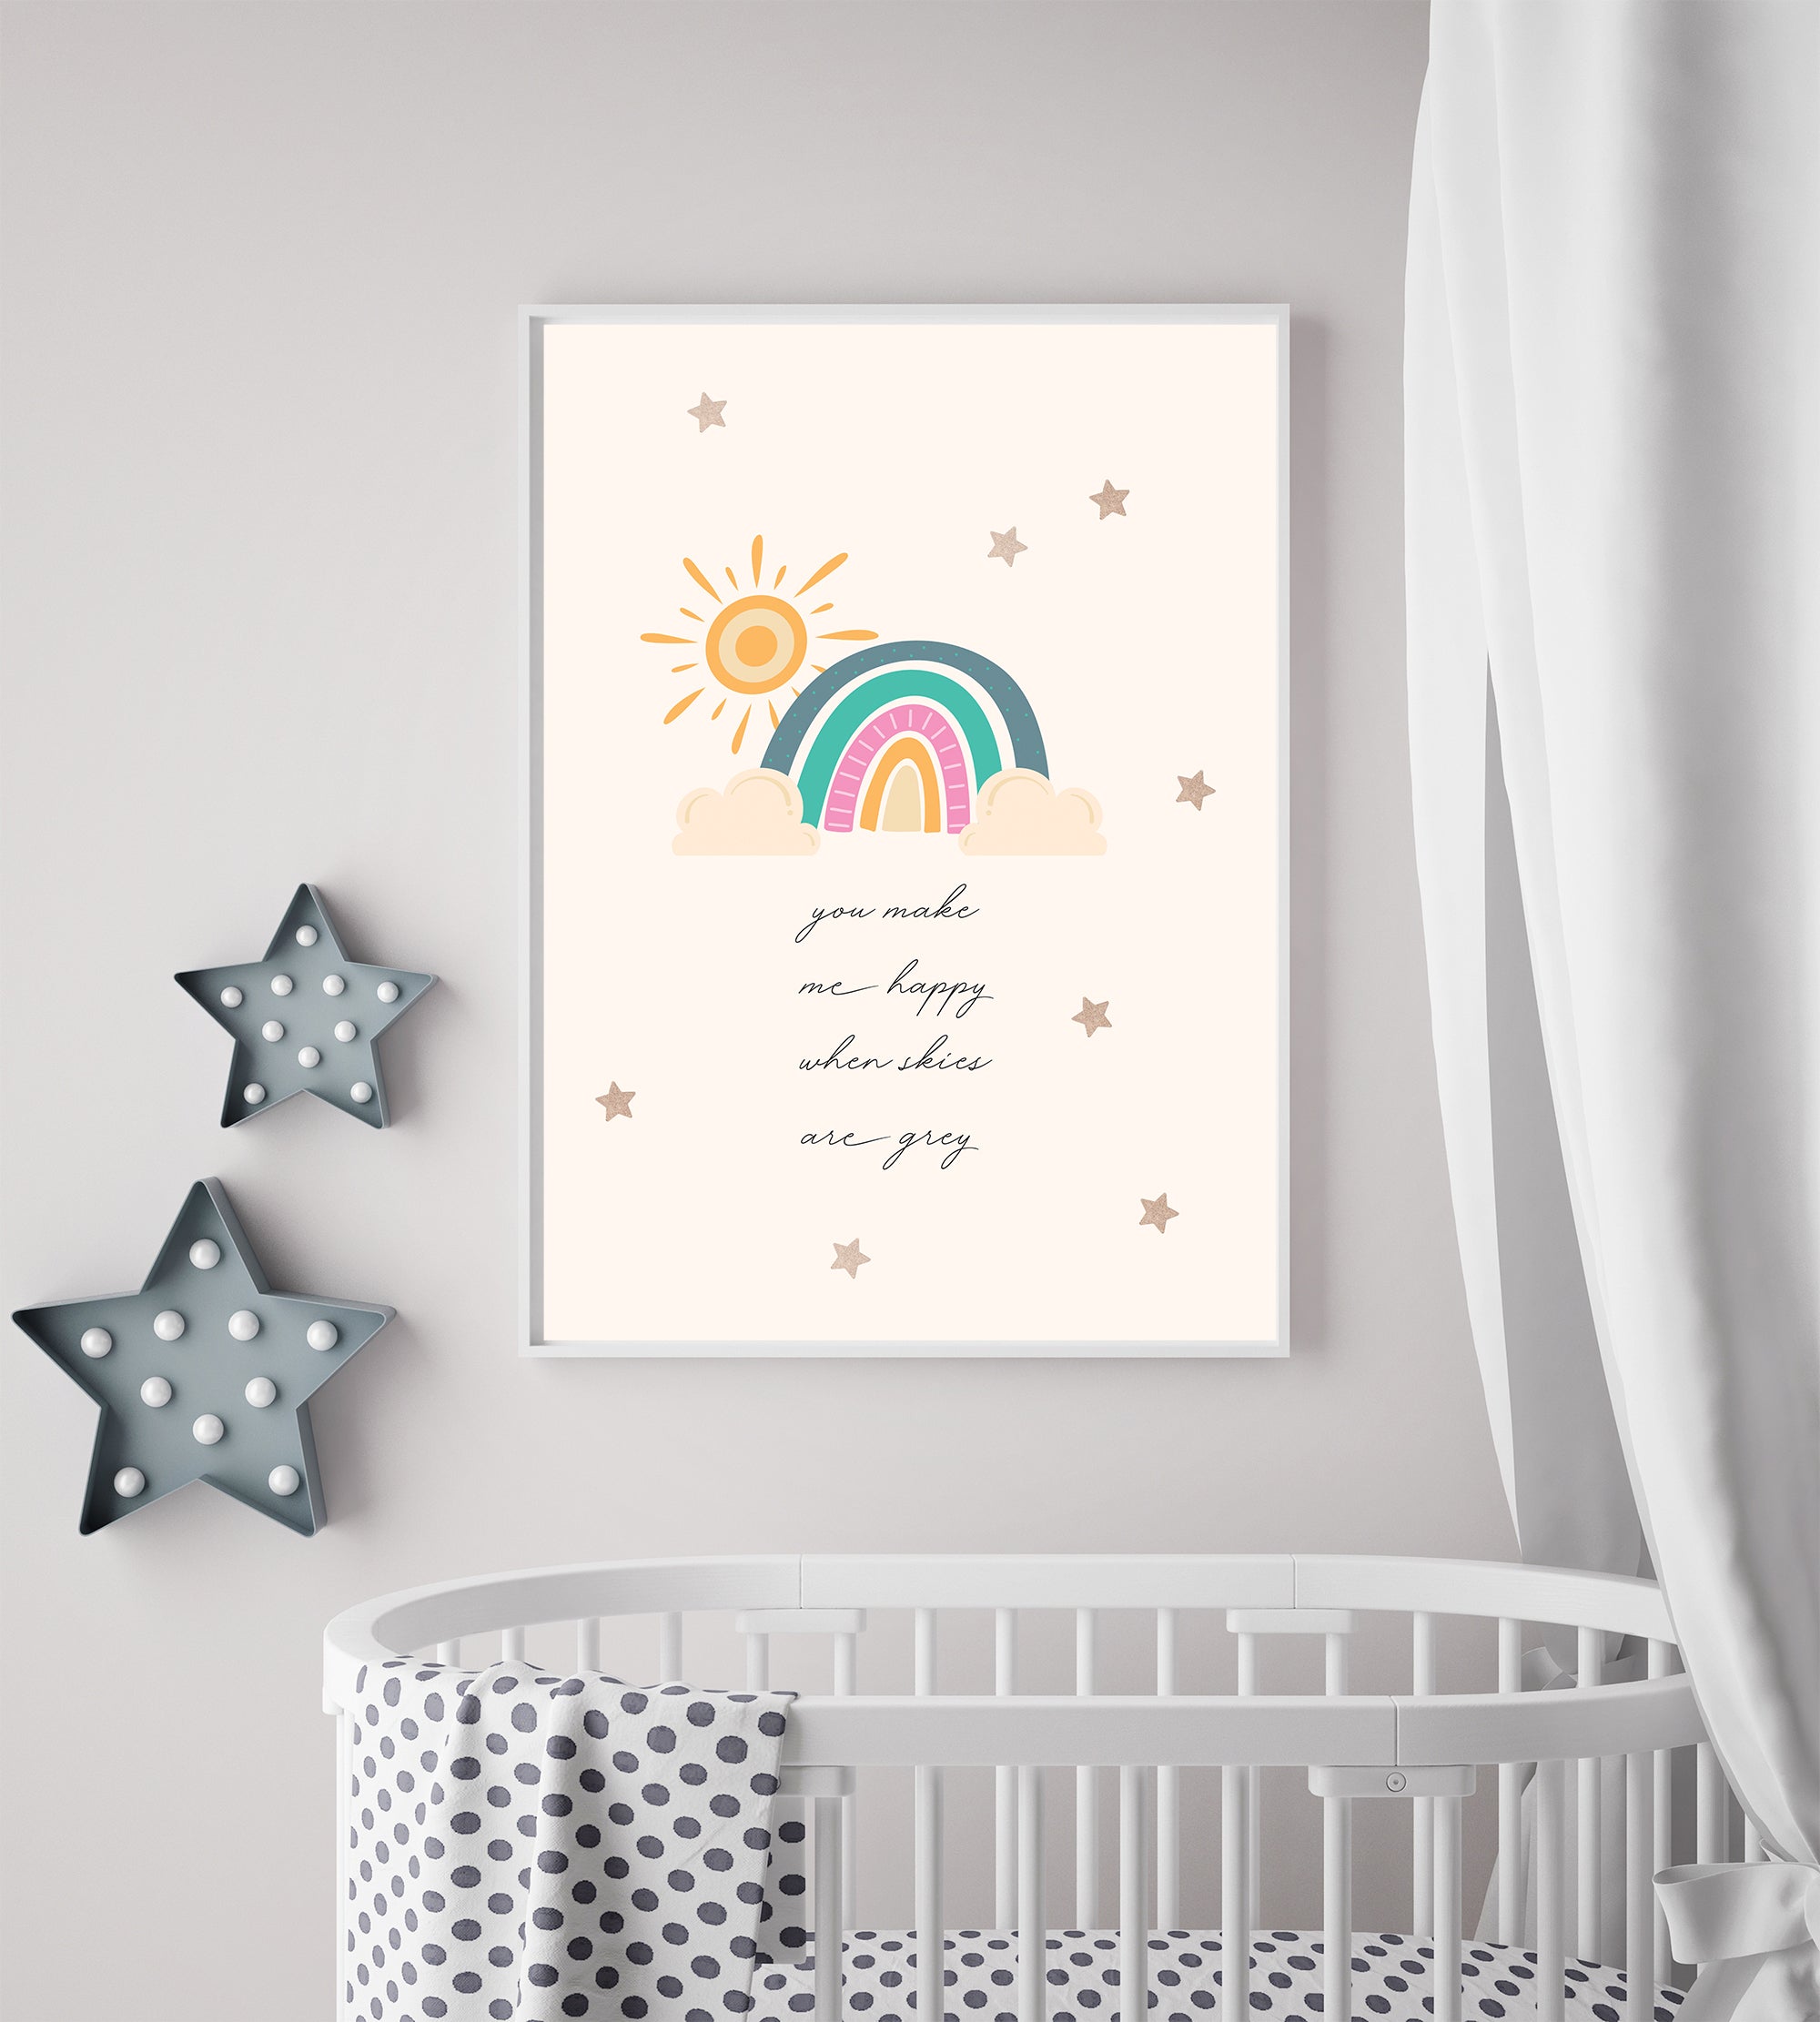 You Make Me Happy When Skies are Grey Print